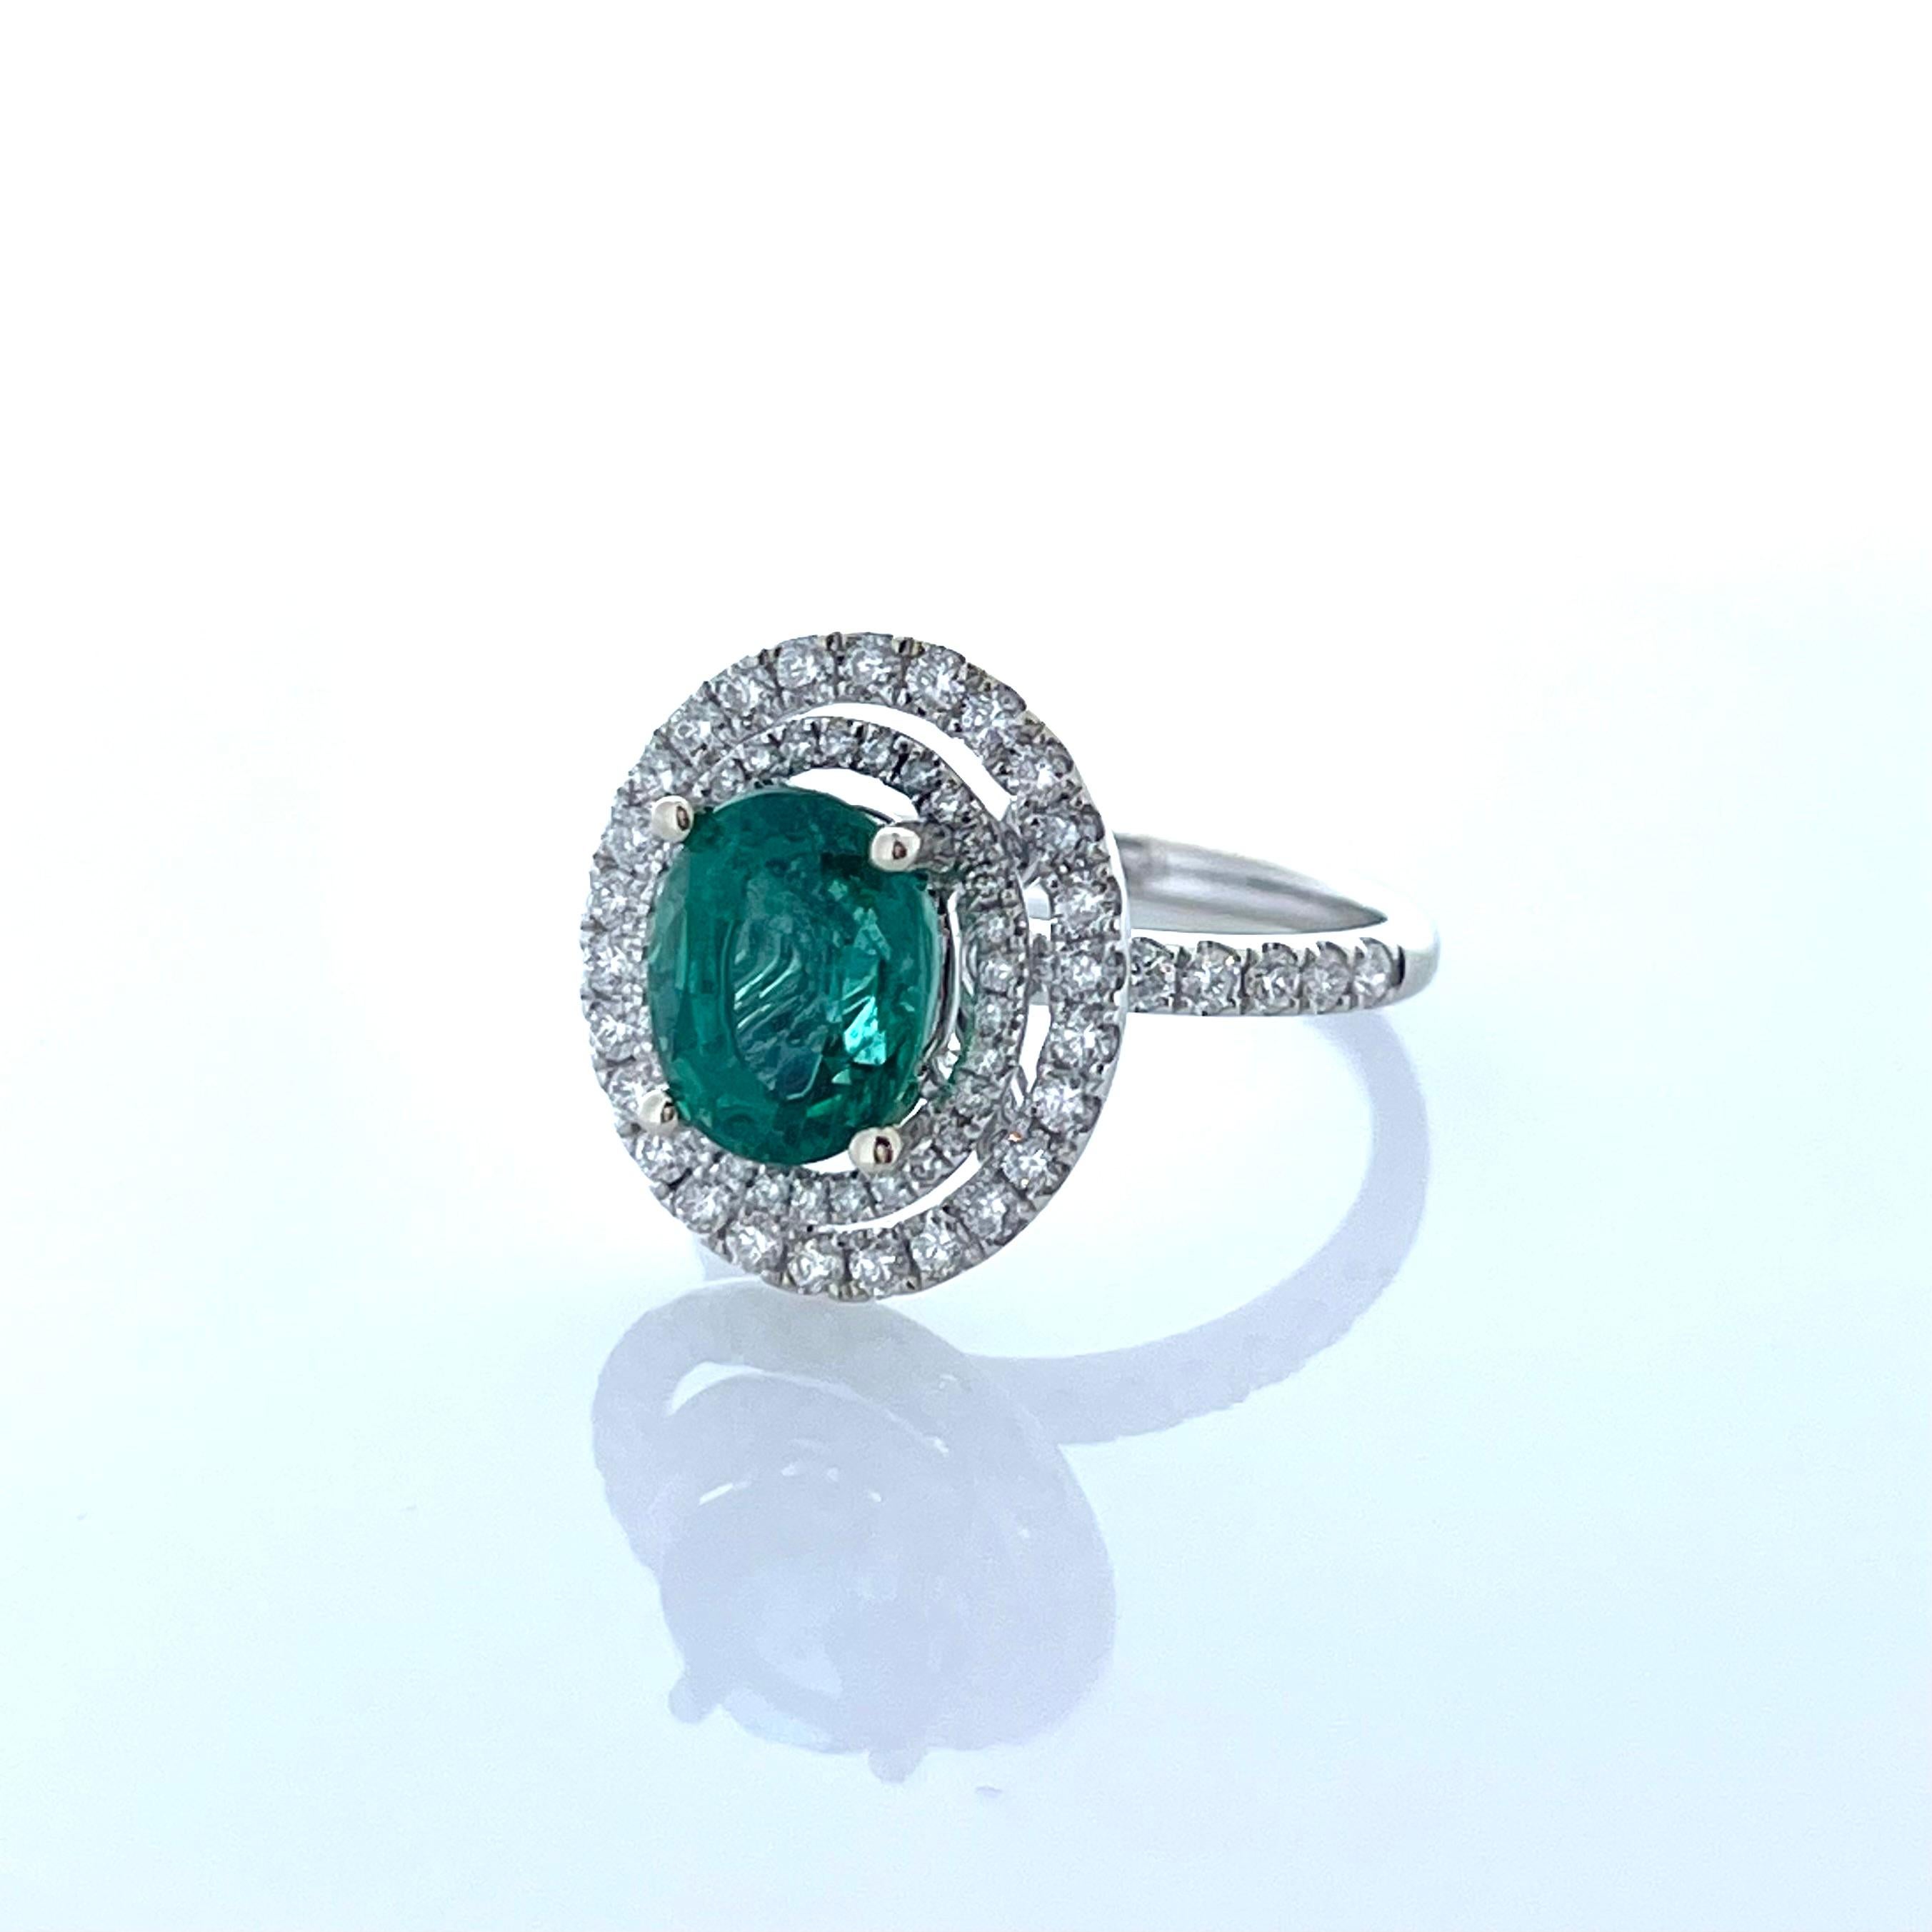 This is a 2.29 Oval cut green emerald. Its transparency and luster are excellent. Sparkling mixed cut diamonds frame this gem in a halo cluster totaling 2.29 carats. Created in brightly polished 18K white gold, this extravagant emerald ring is the